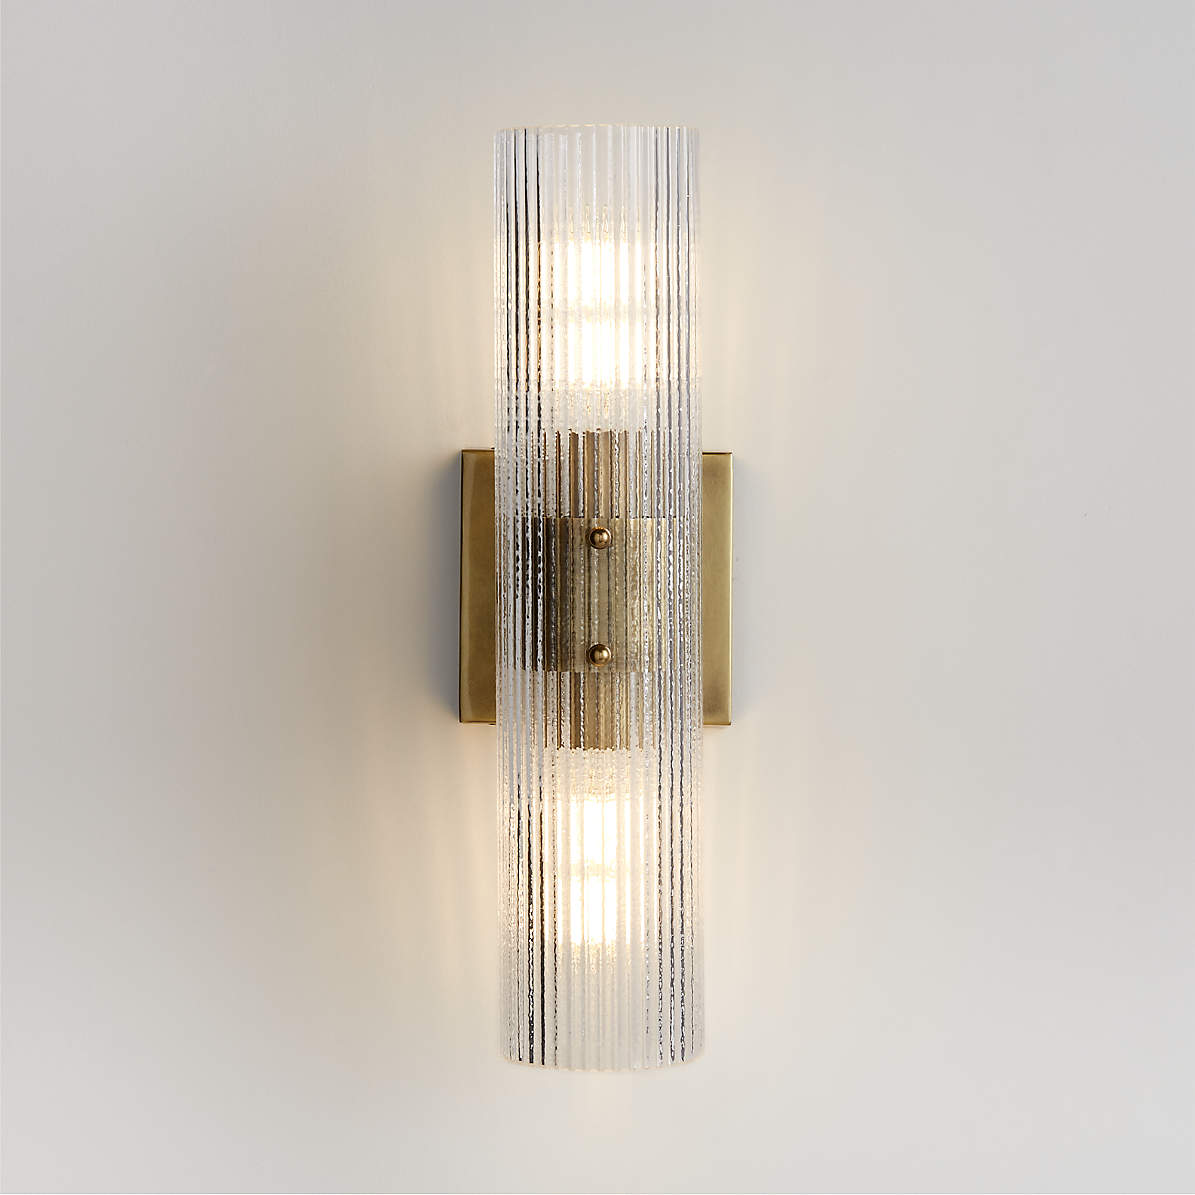 2 light wall sconce